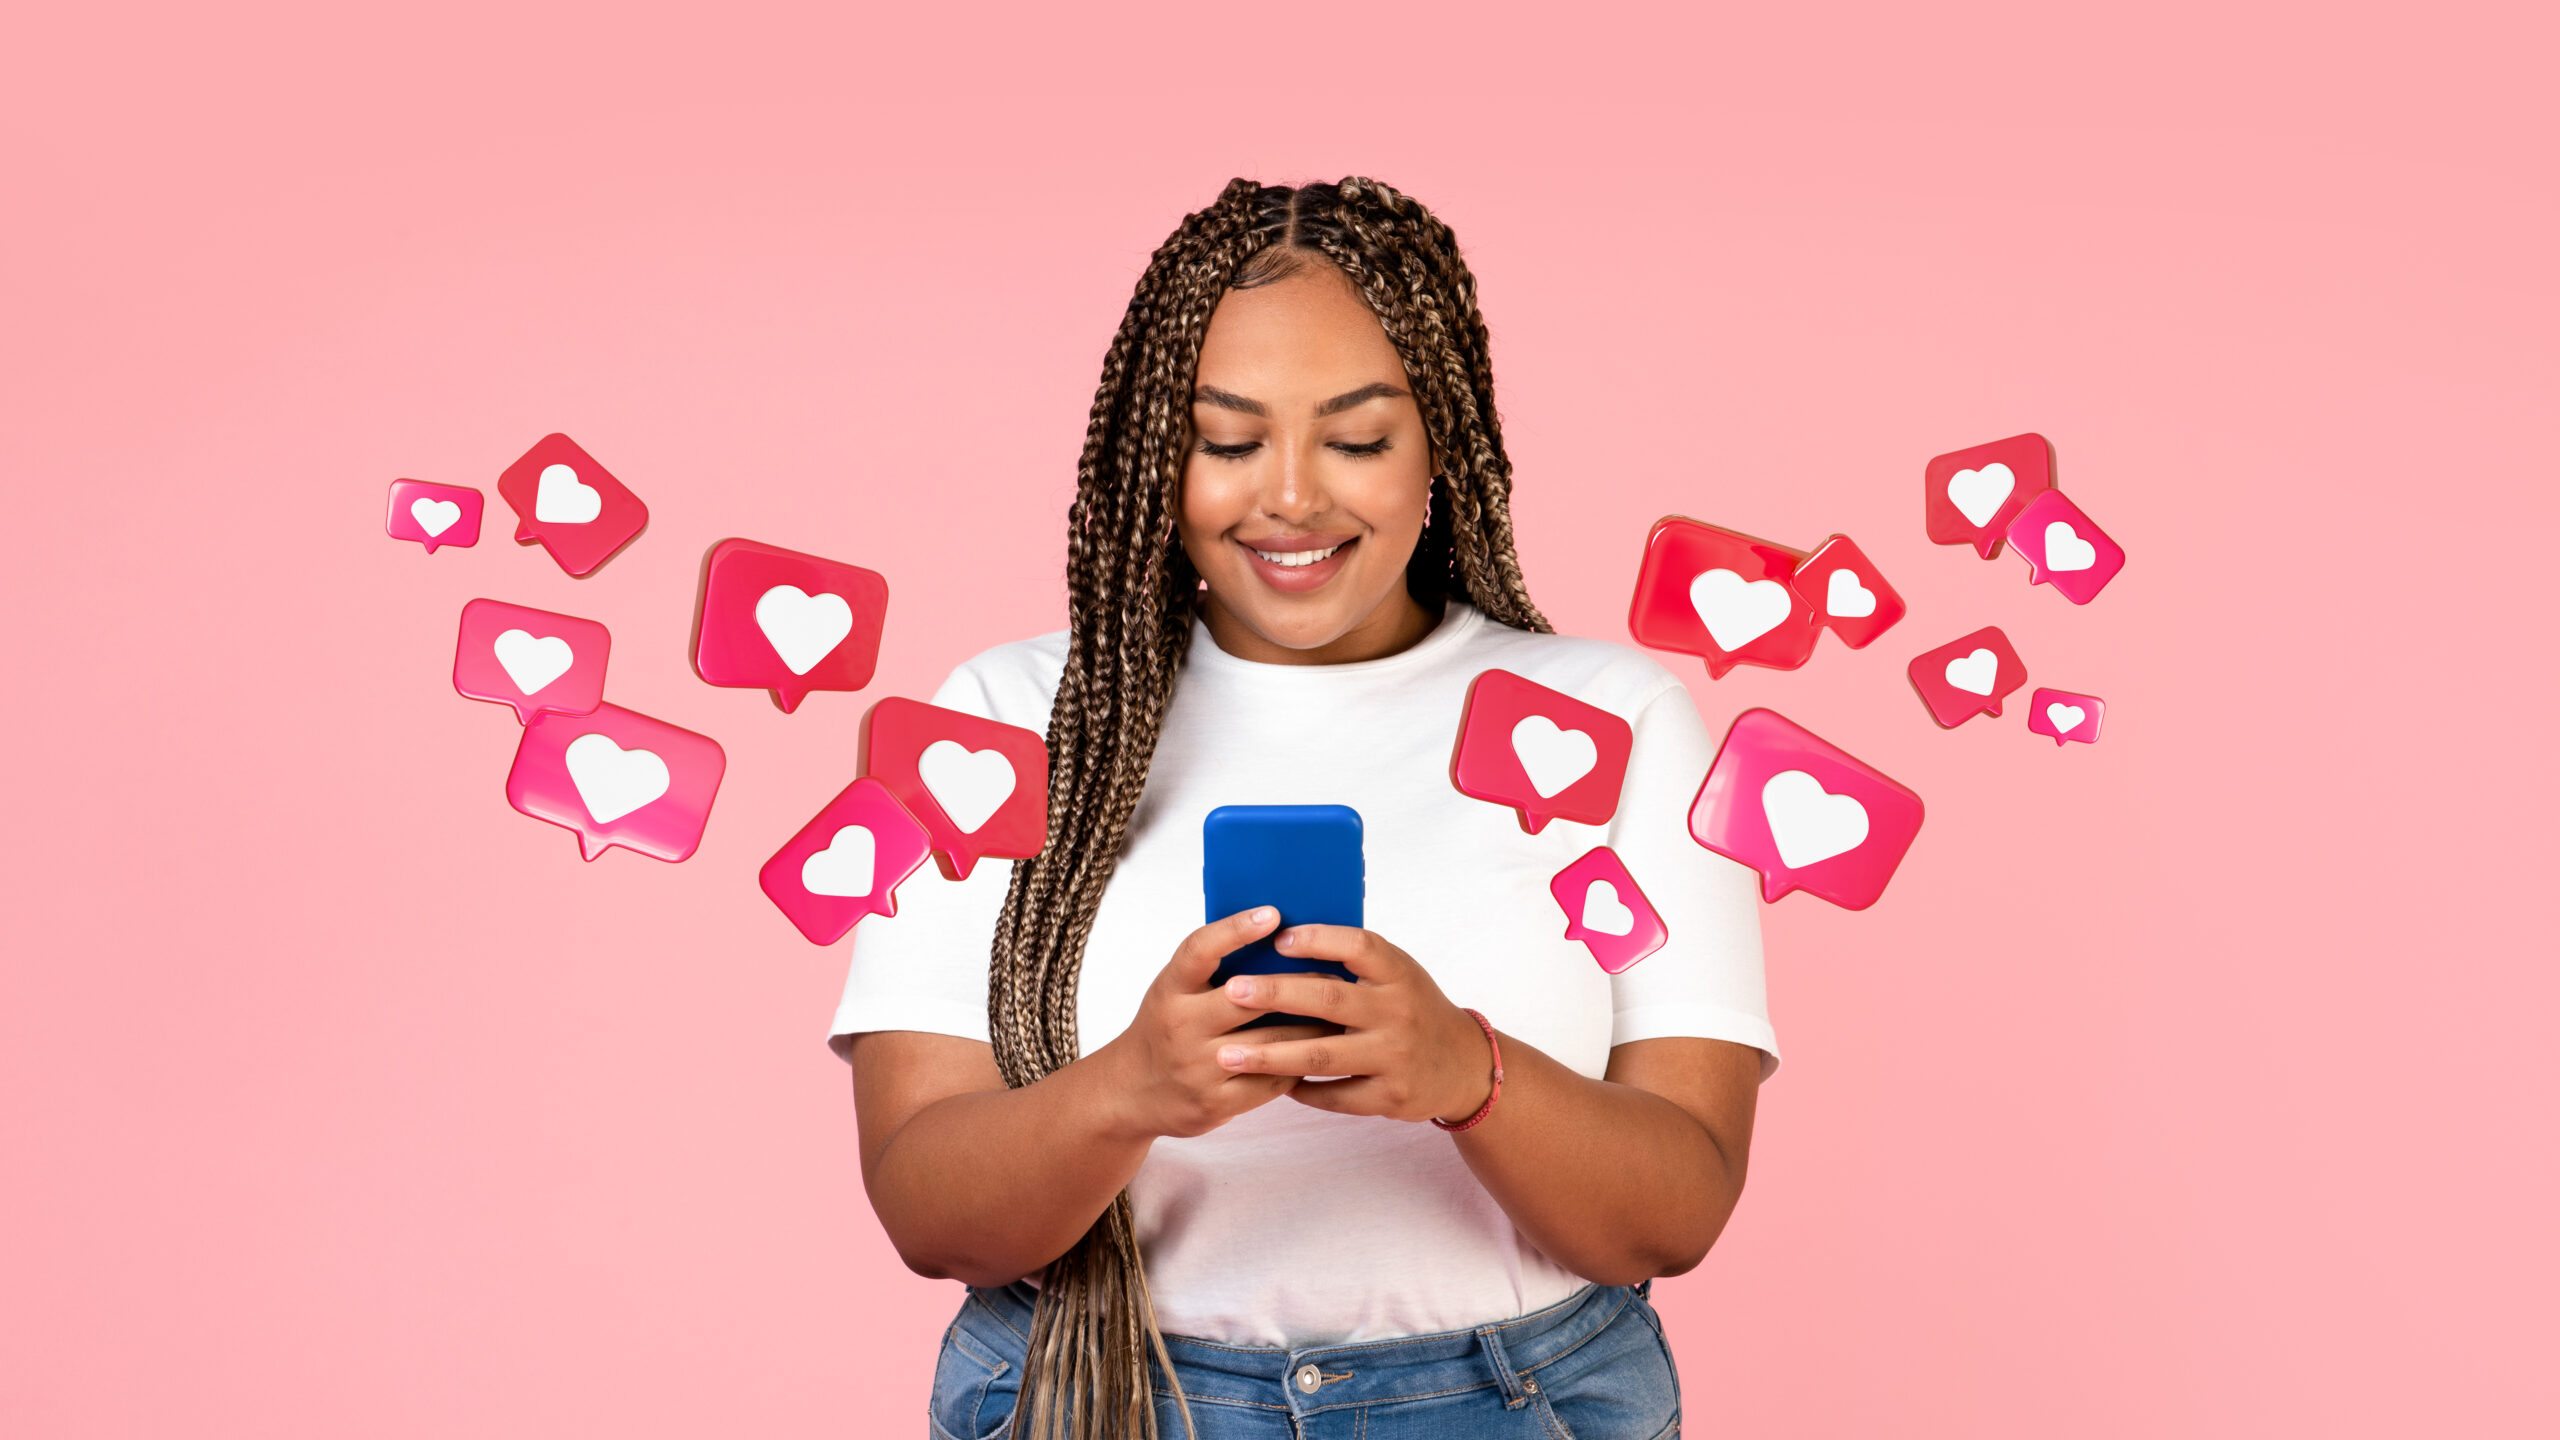 Cheerful young african american female with pigtails has romantic chat with hearts on smartphone